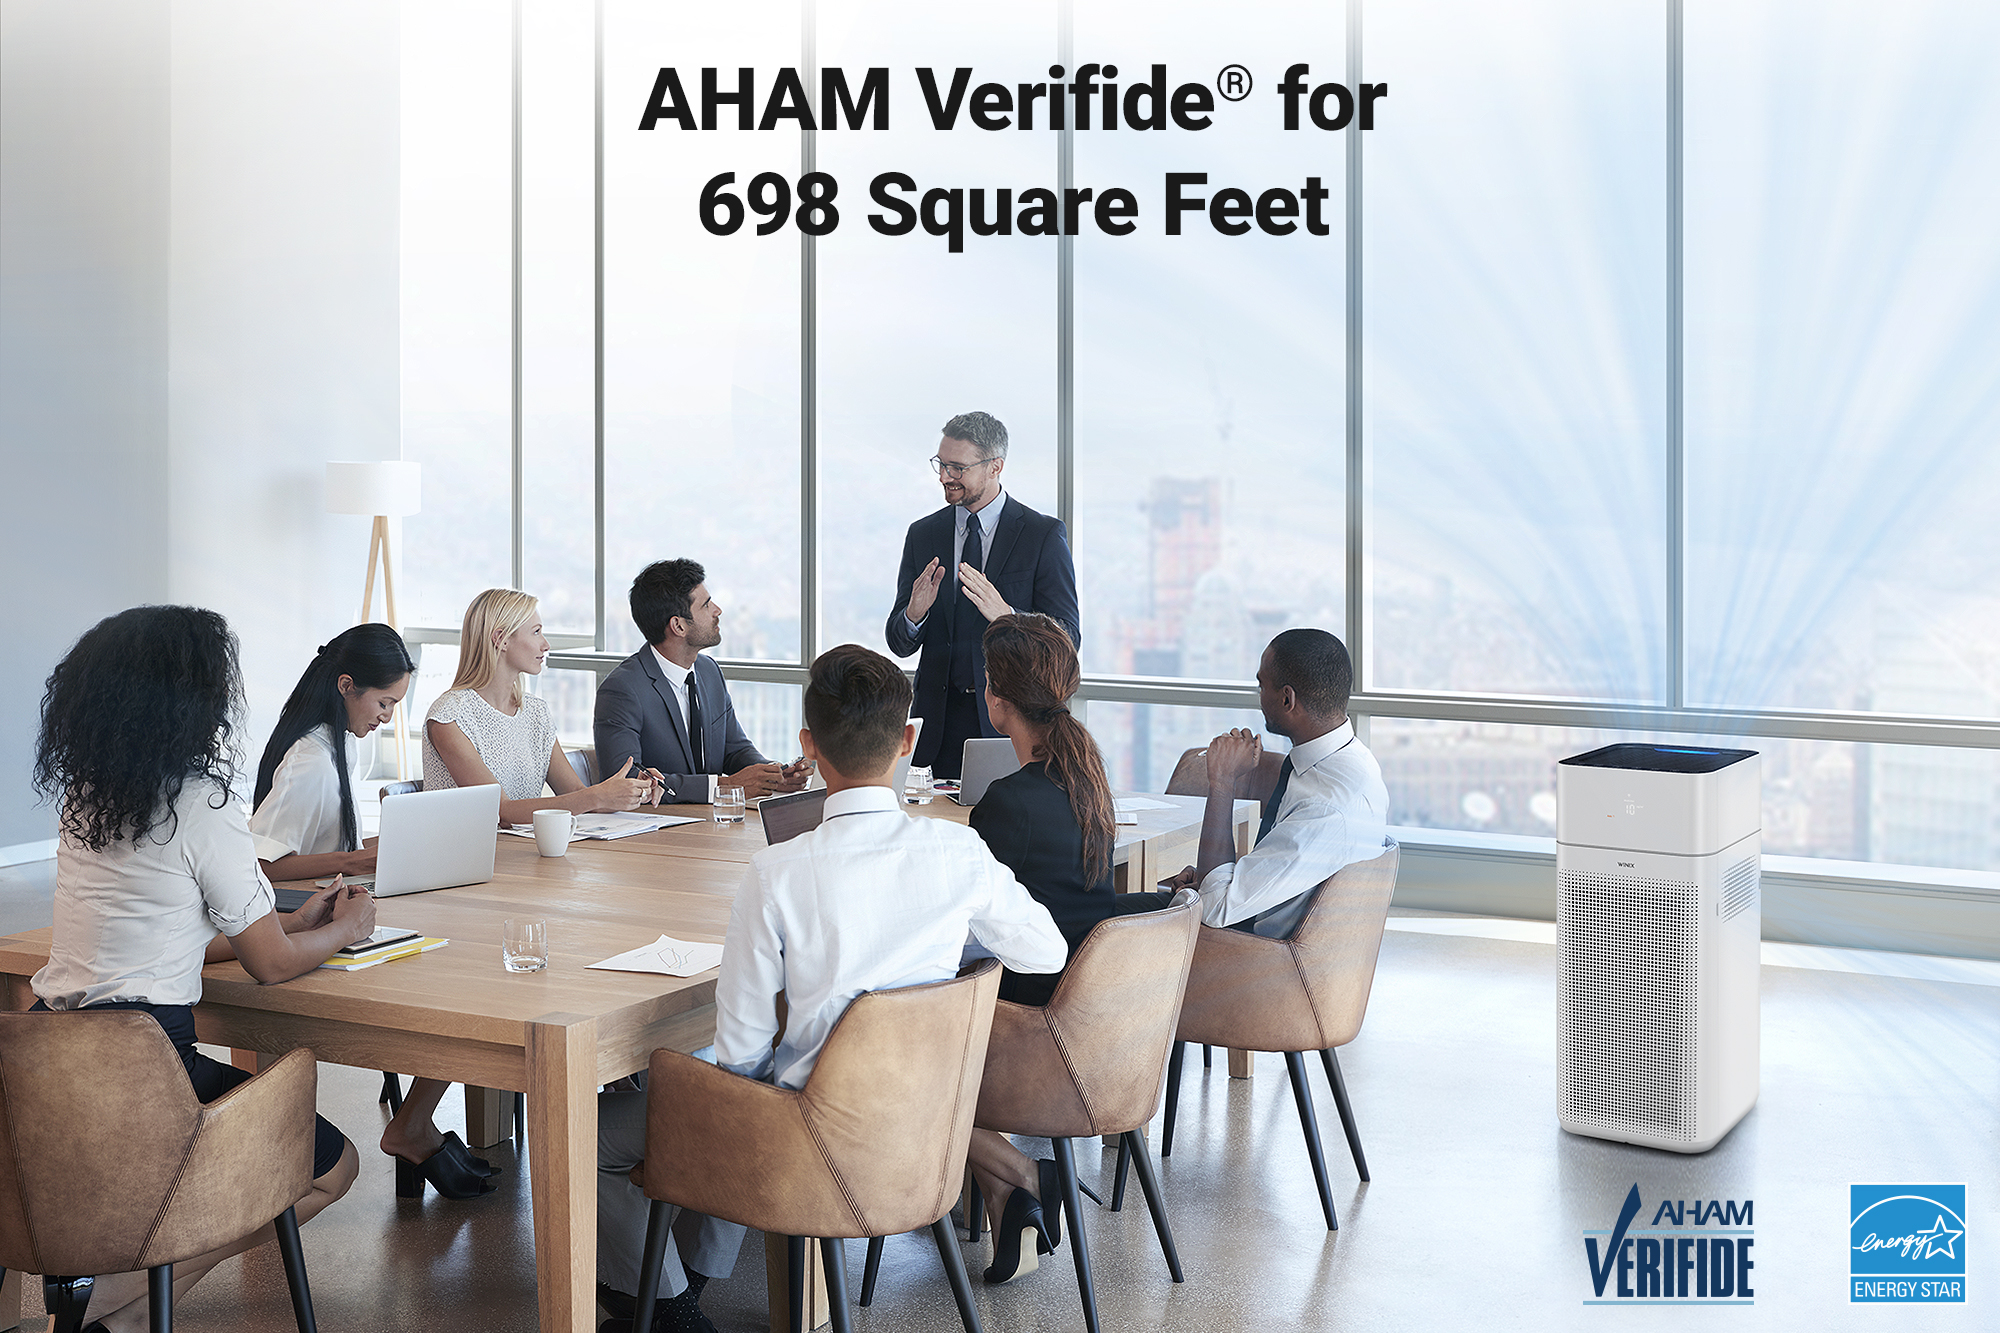 XQ air purifier in an office meeting setting with text saying AHAM verified for 698 square feet and AHAM verified logo and energy star logo in bottom corner of image